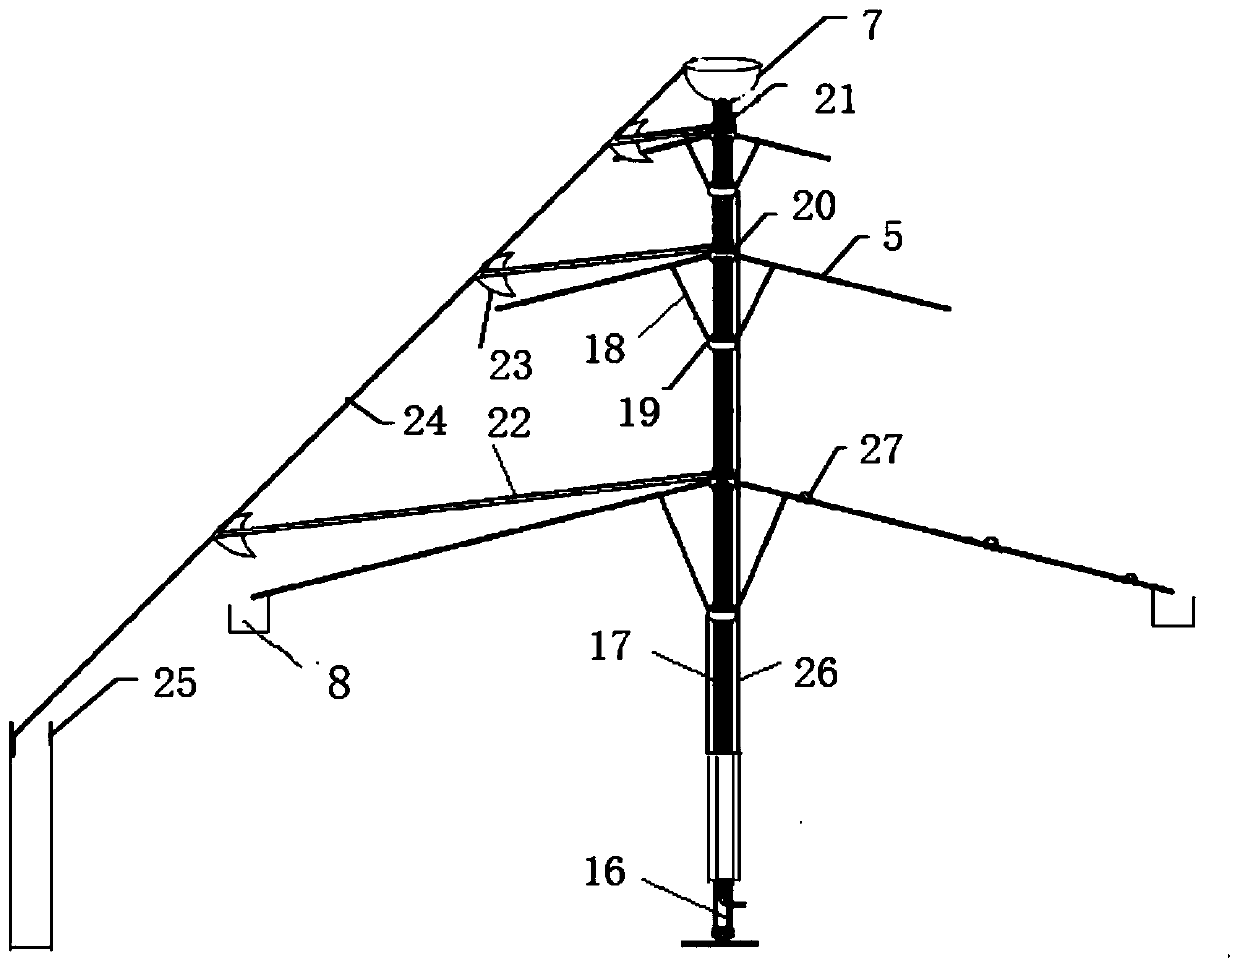 An umbrella-shaped tower-type photobiological cultivator